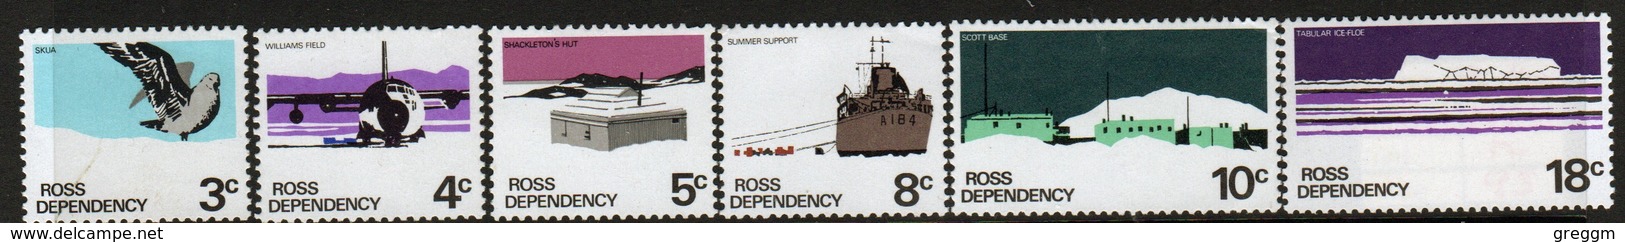 Ross Dependency Set Of Definitive Stamps From 1972. - Unused Stamps